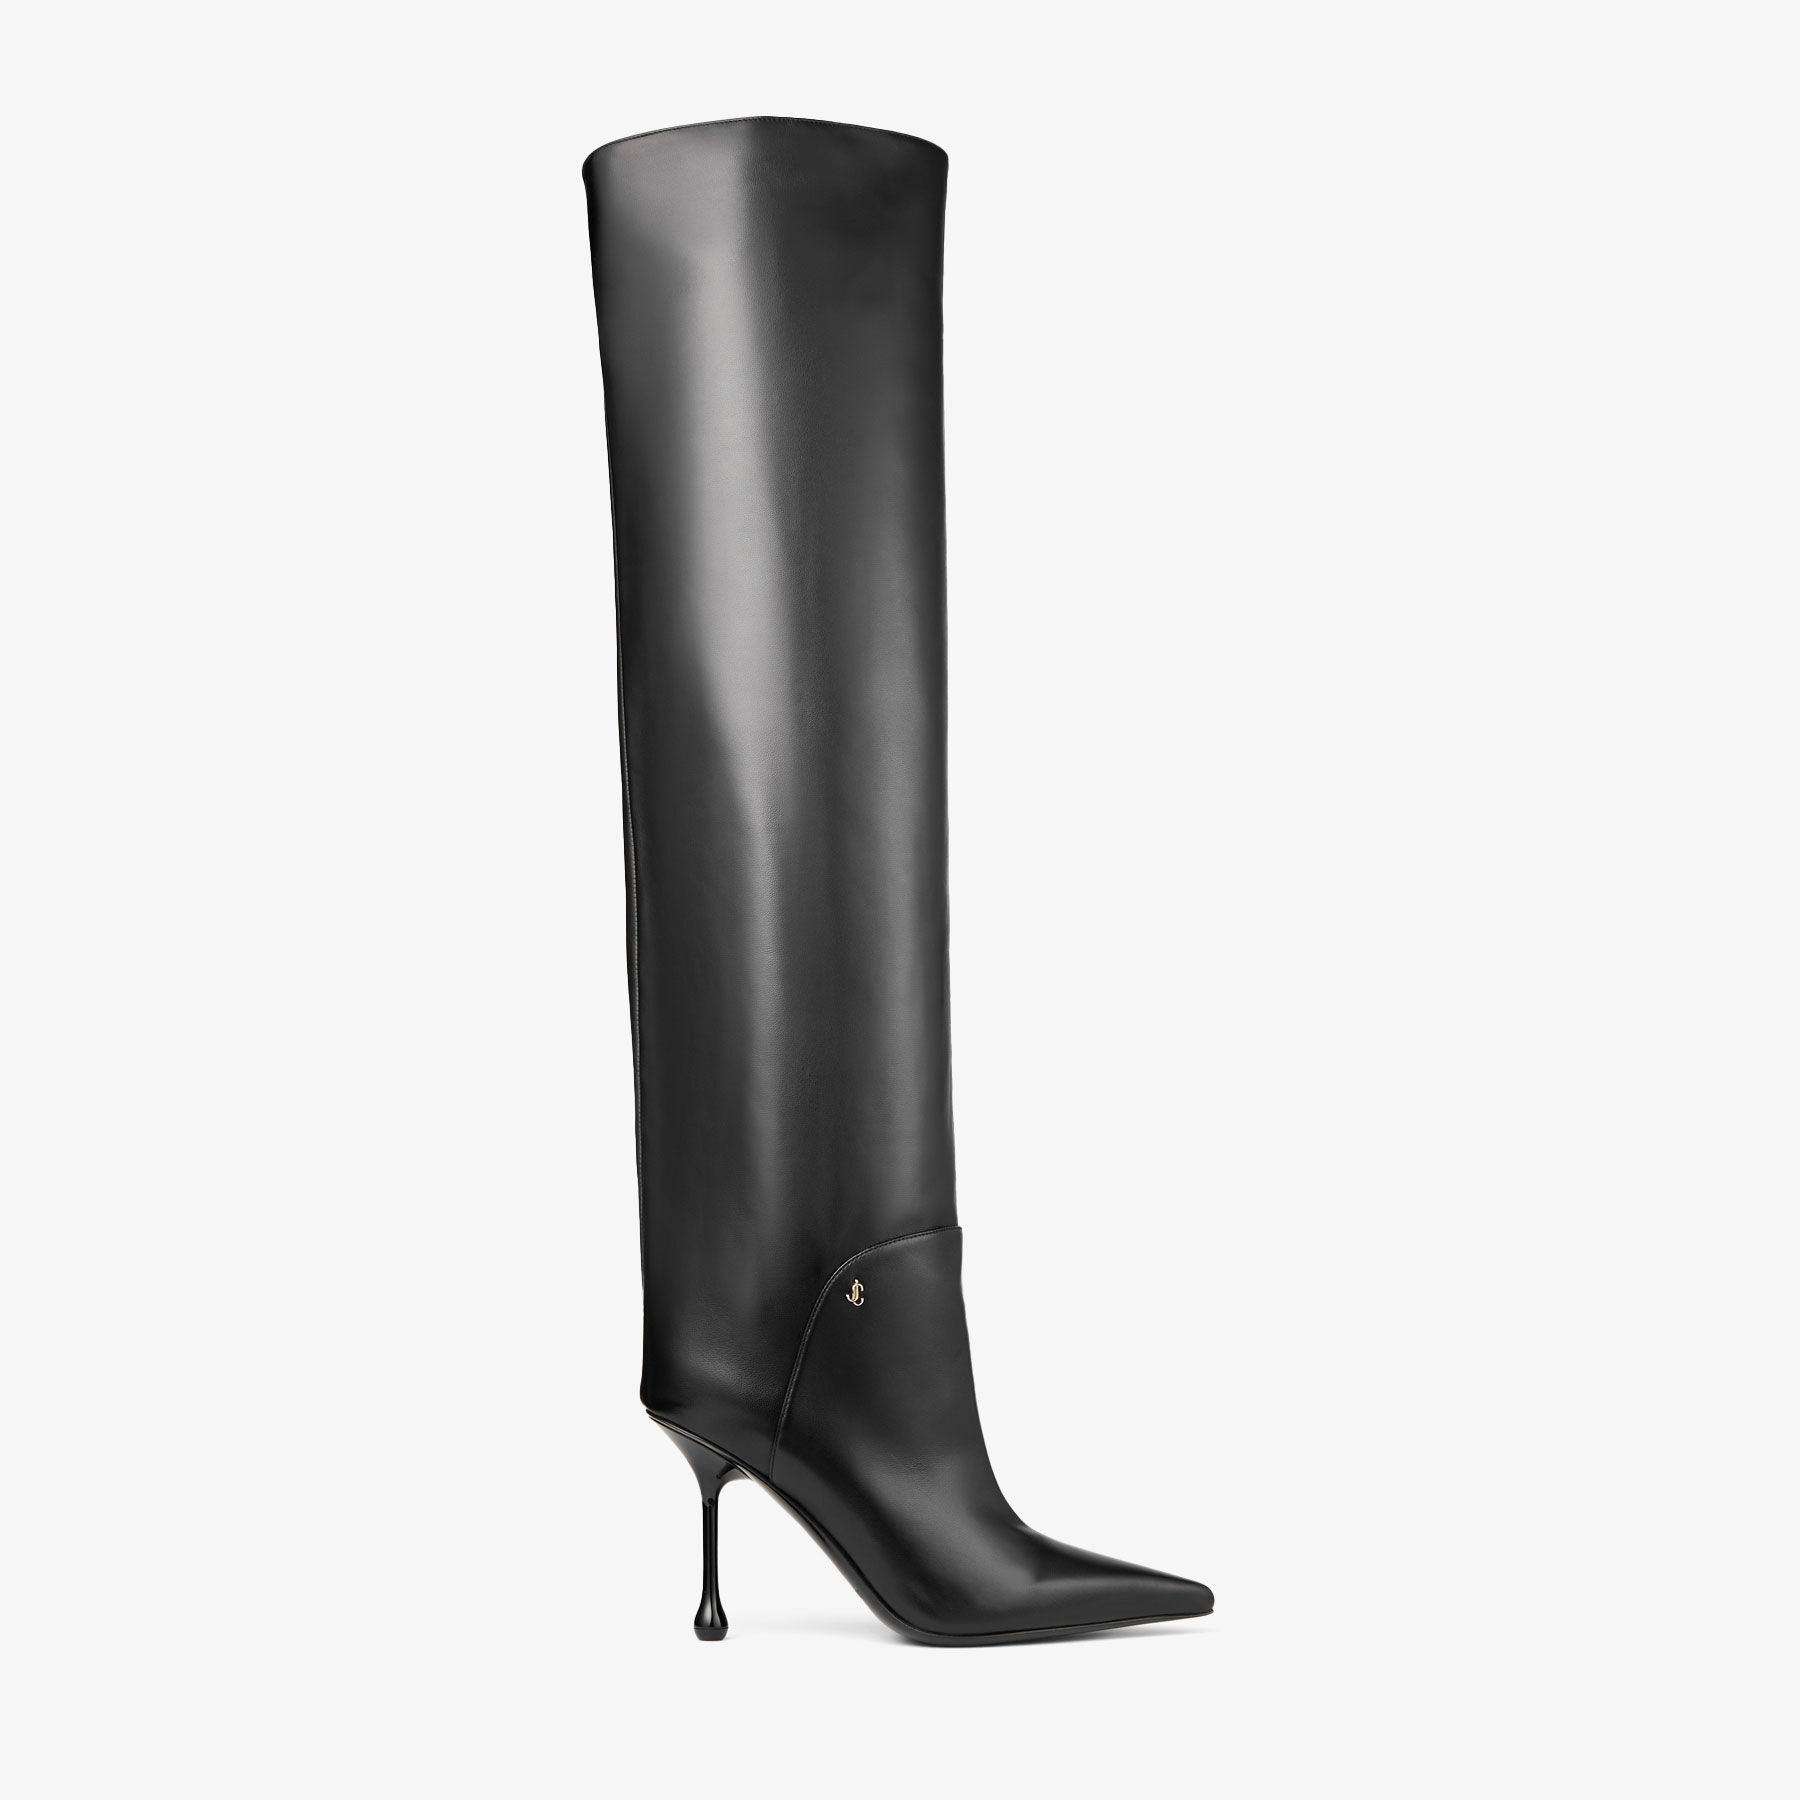 Cycas Knee Boot 95
Black Nappa Leather Knee-High Boots - 1